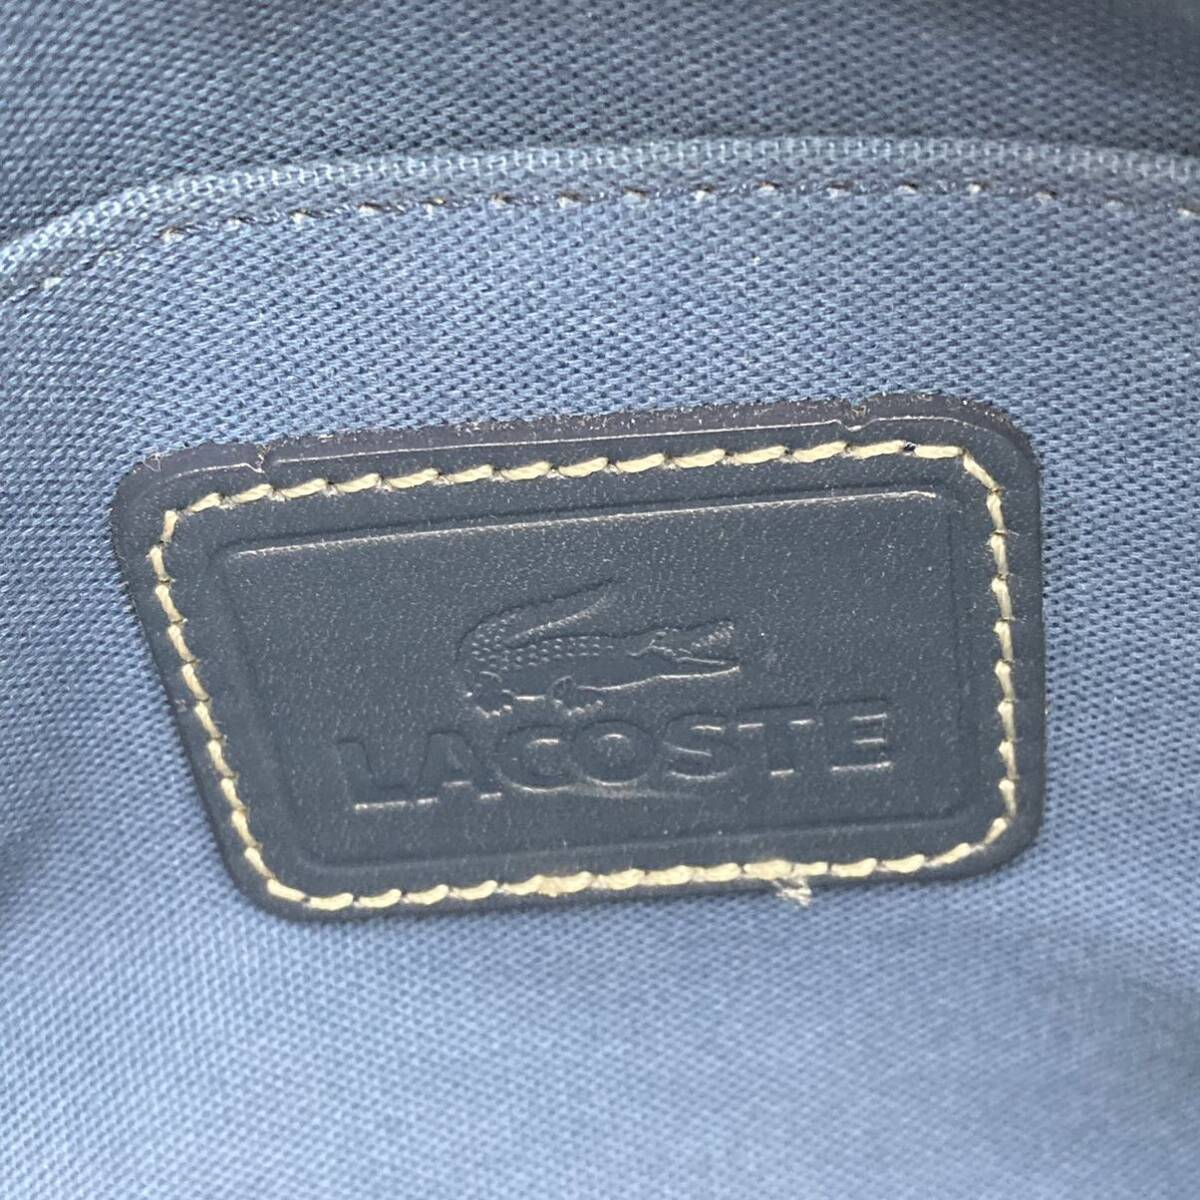  unused LACOSTE Lacoste clutch bag second bag key attaching navy 